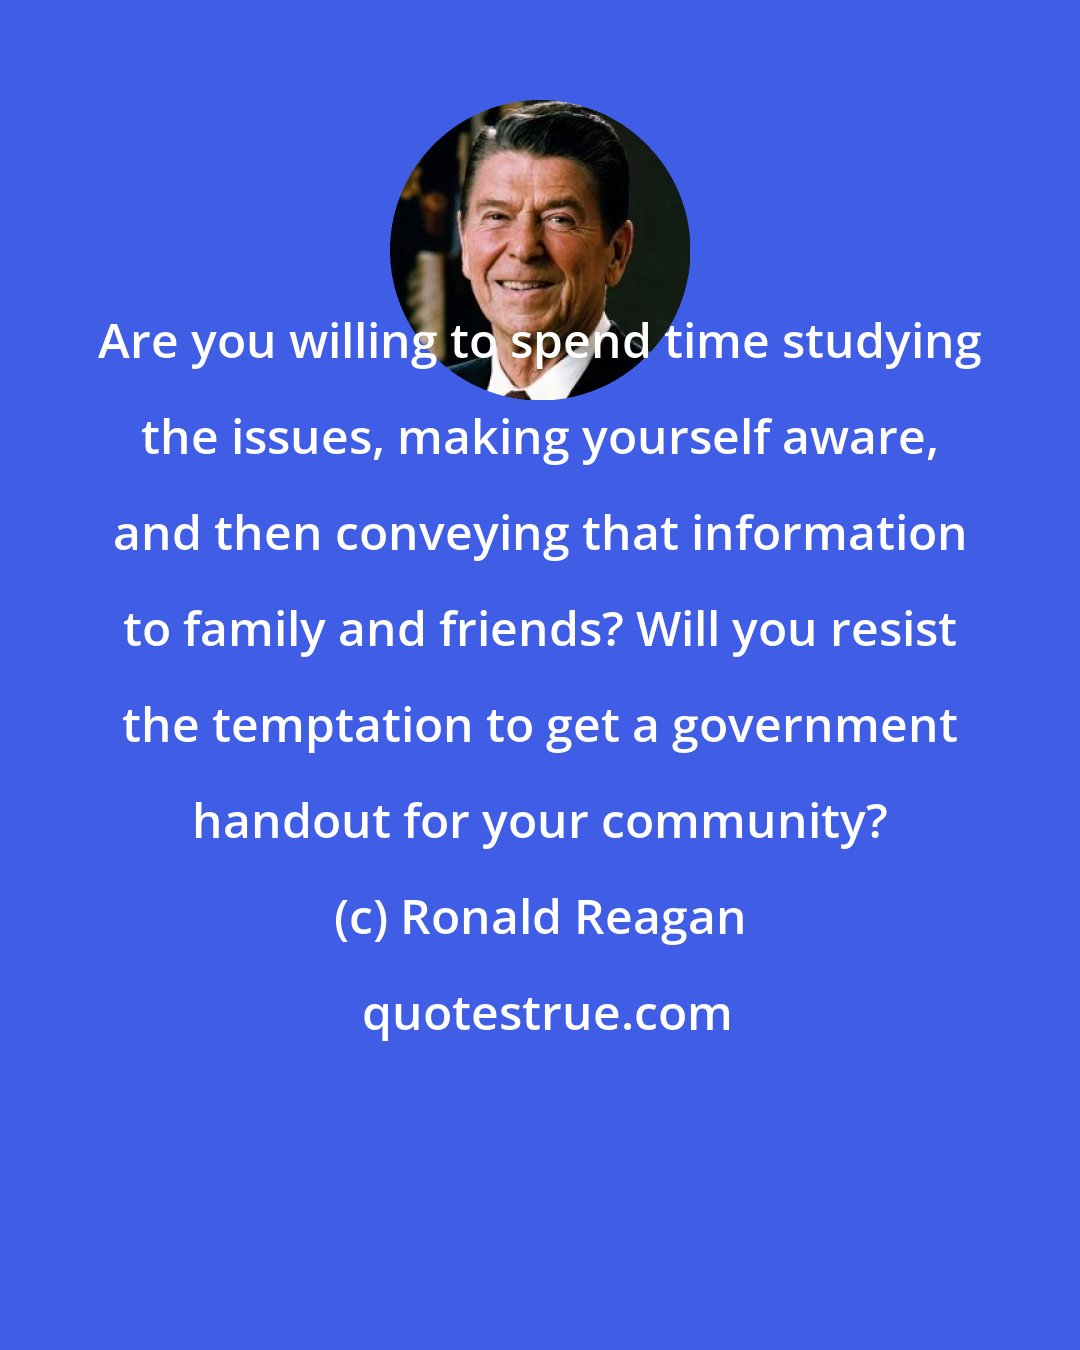 Ronald Reagan: Are you willing to spend time studying the issues, making yourself aware, and then conveying that information to family and friends? Will you resist the temptation to get a government handout for your community?